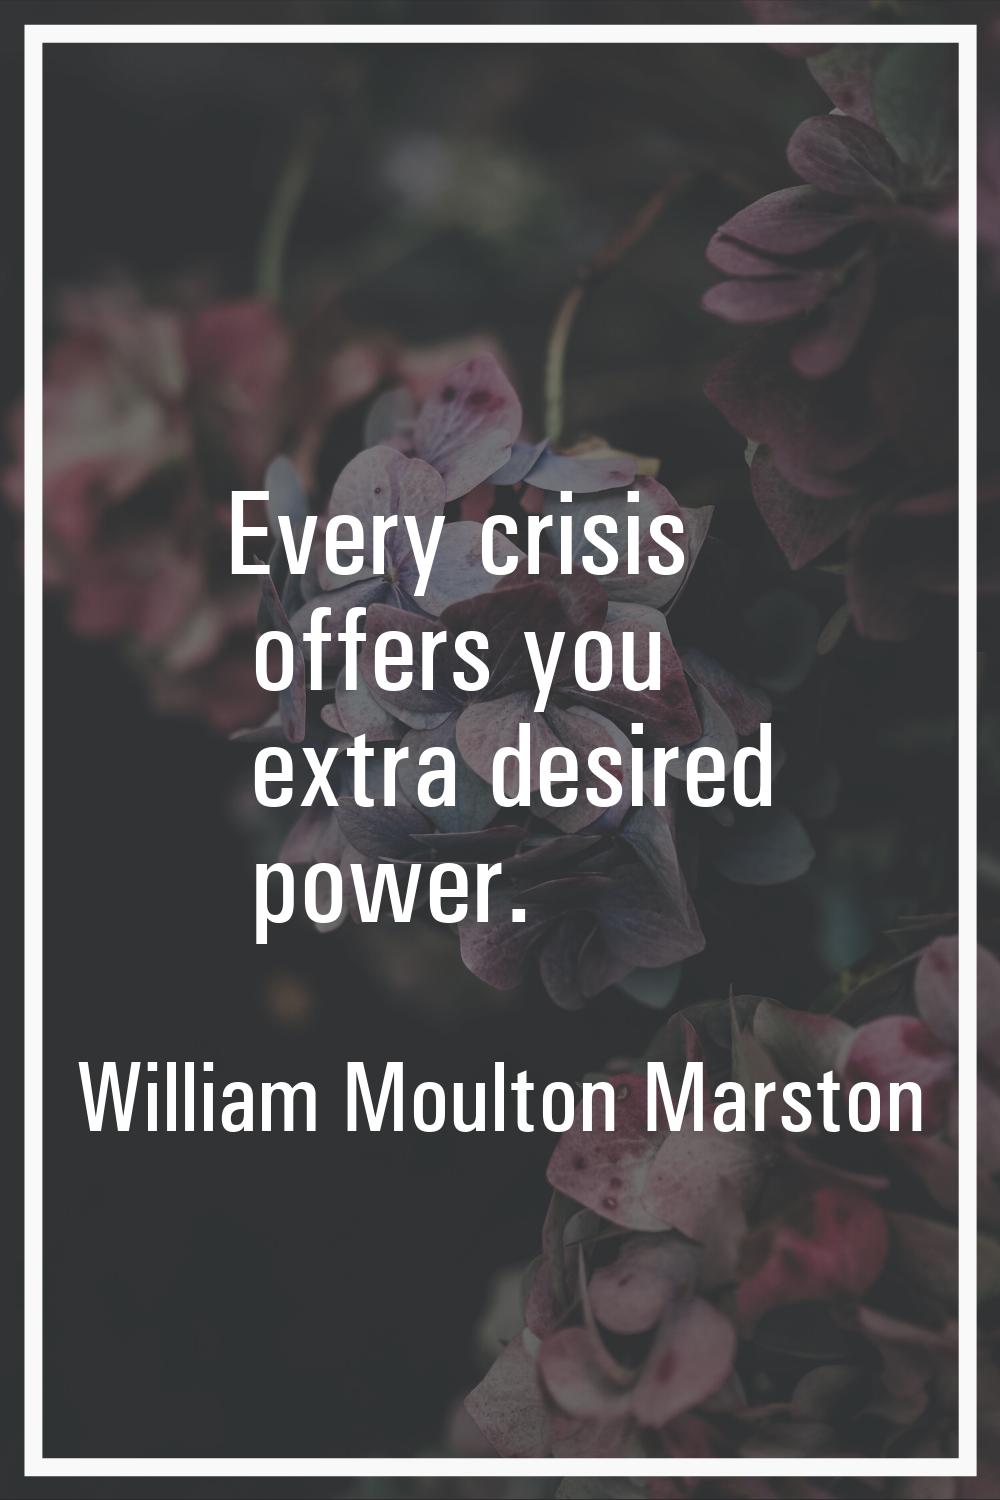 Every crisis offers you extra desired power.